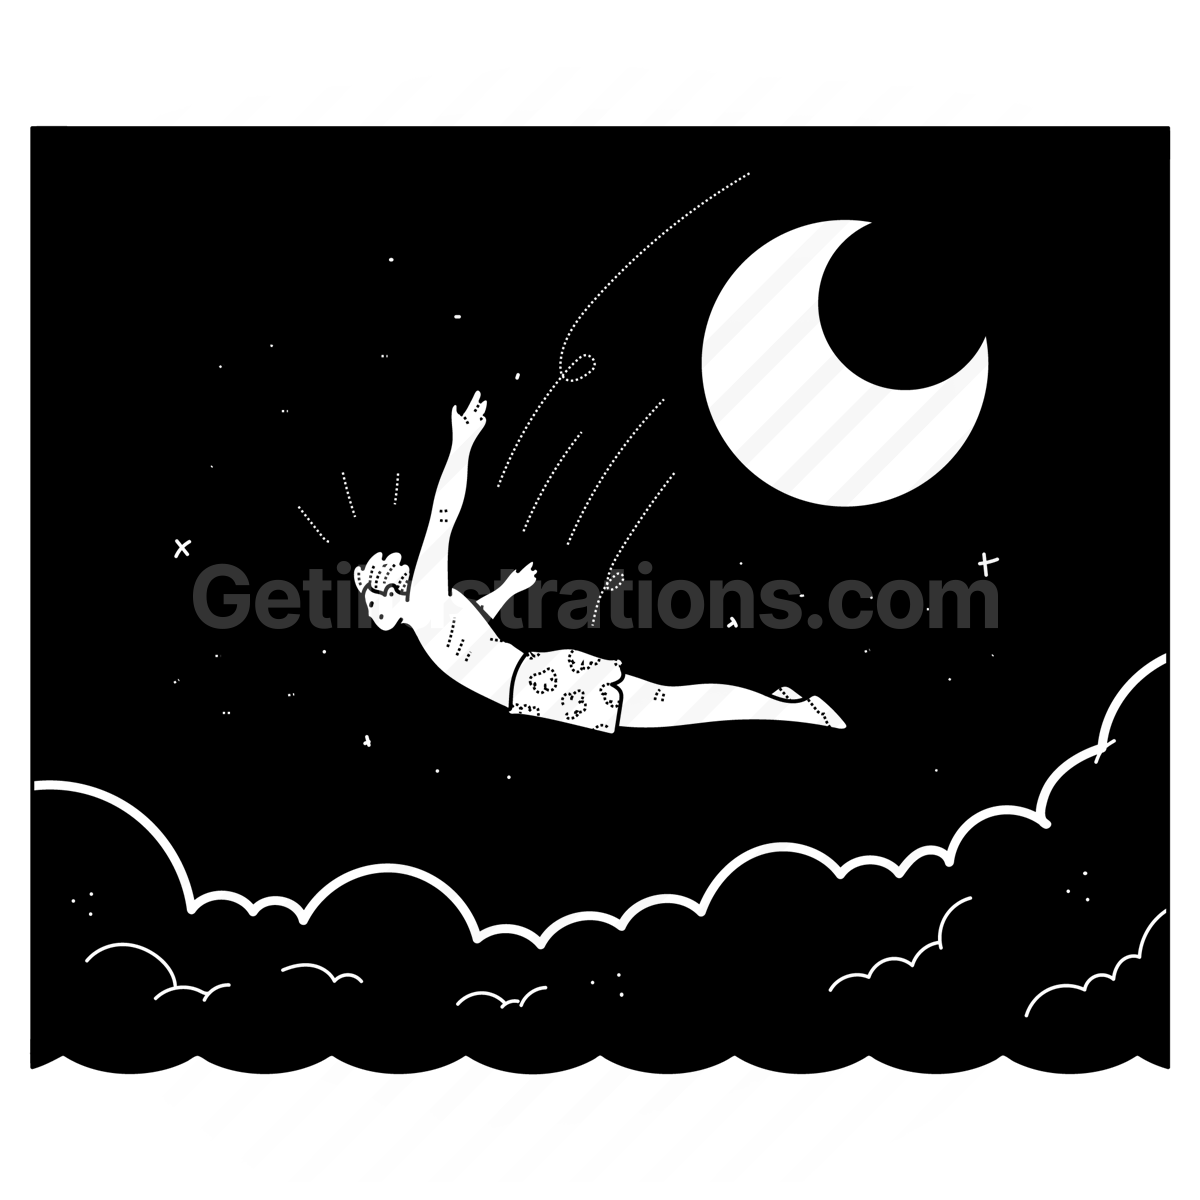 diving, dive, night, cliffdiving, outdoors, nighttime, activity, sport